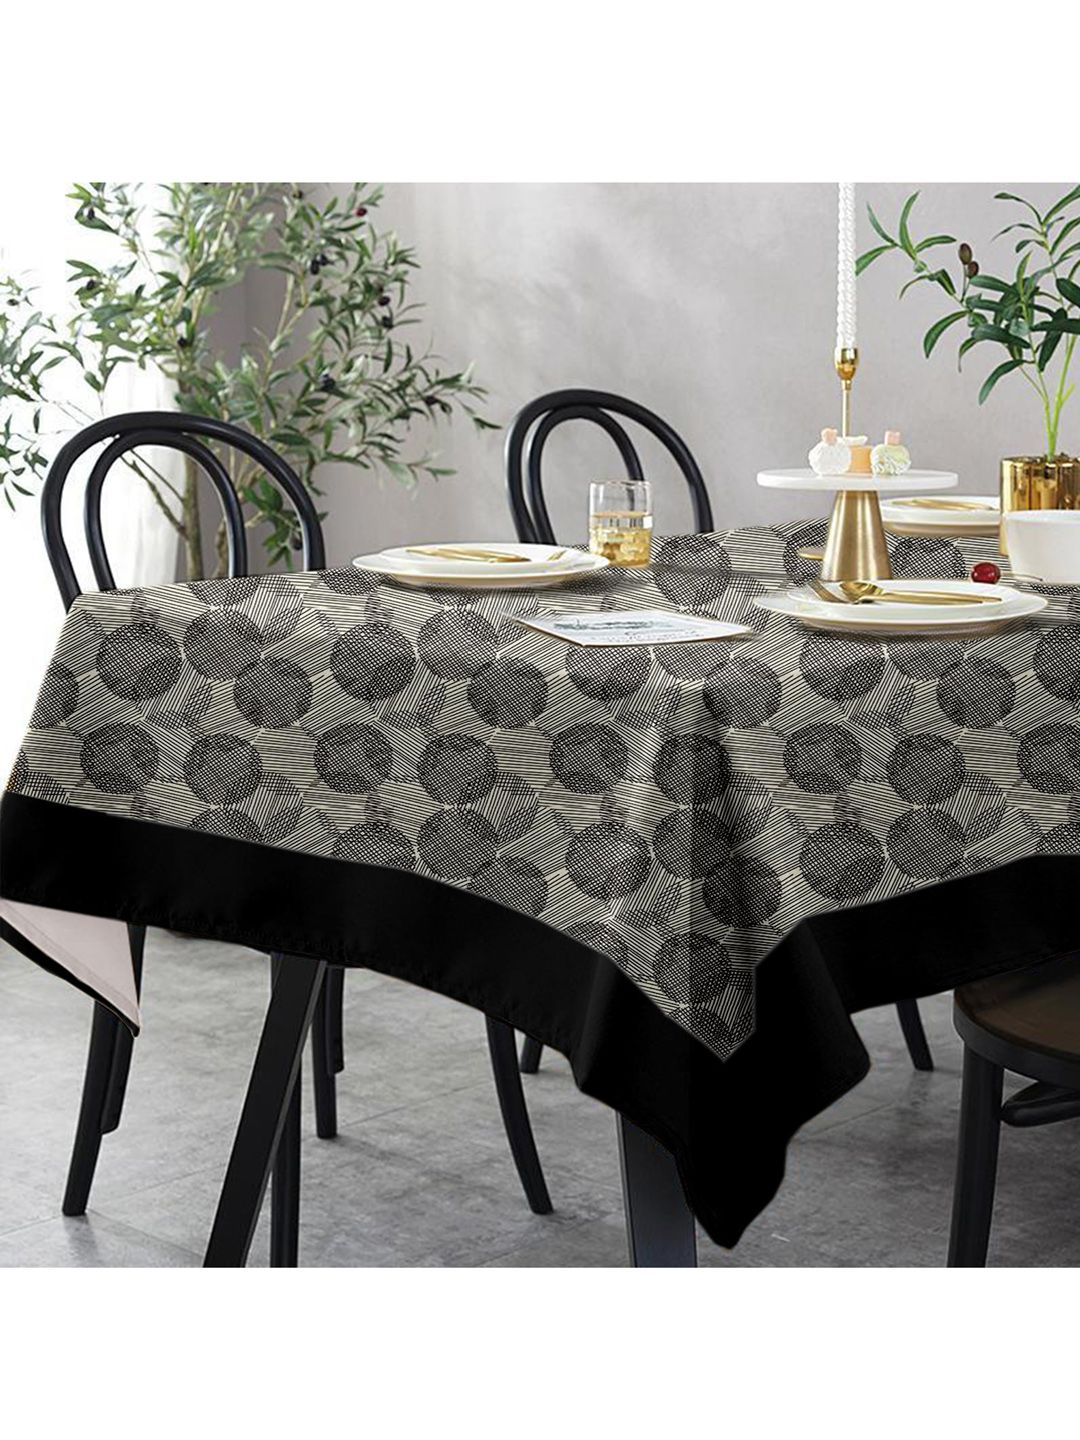 Lushomes 8 Seater Geometric Printed Table Cloth Pack Of 1 Price in India